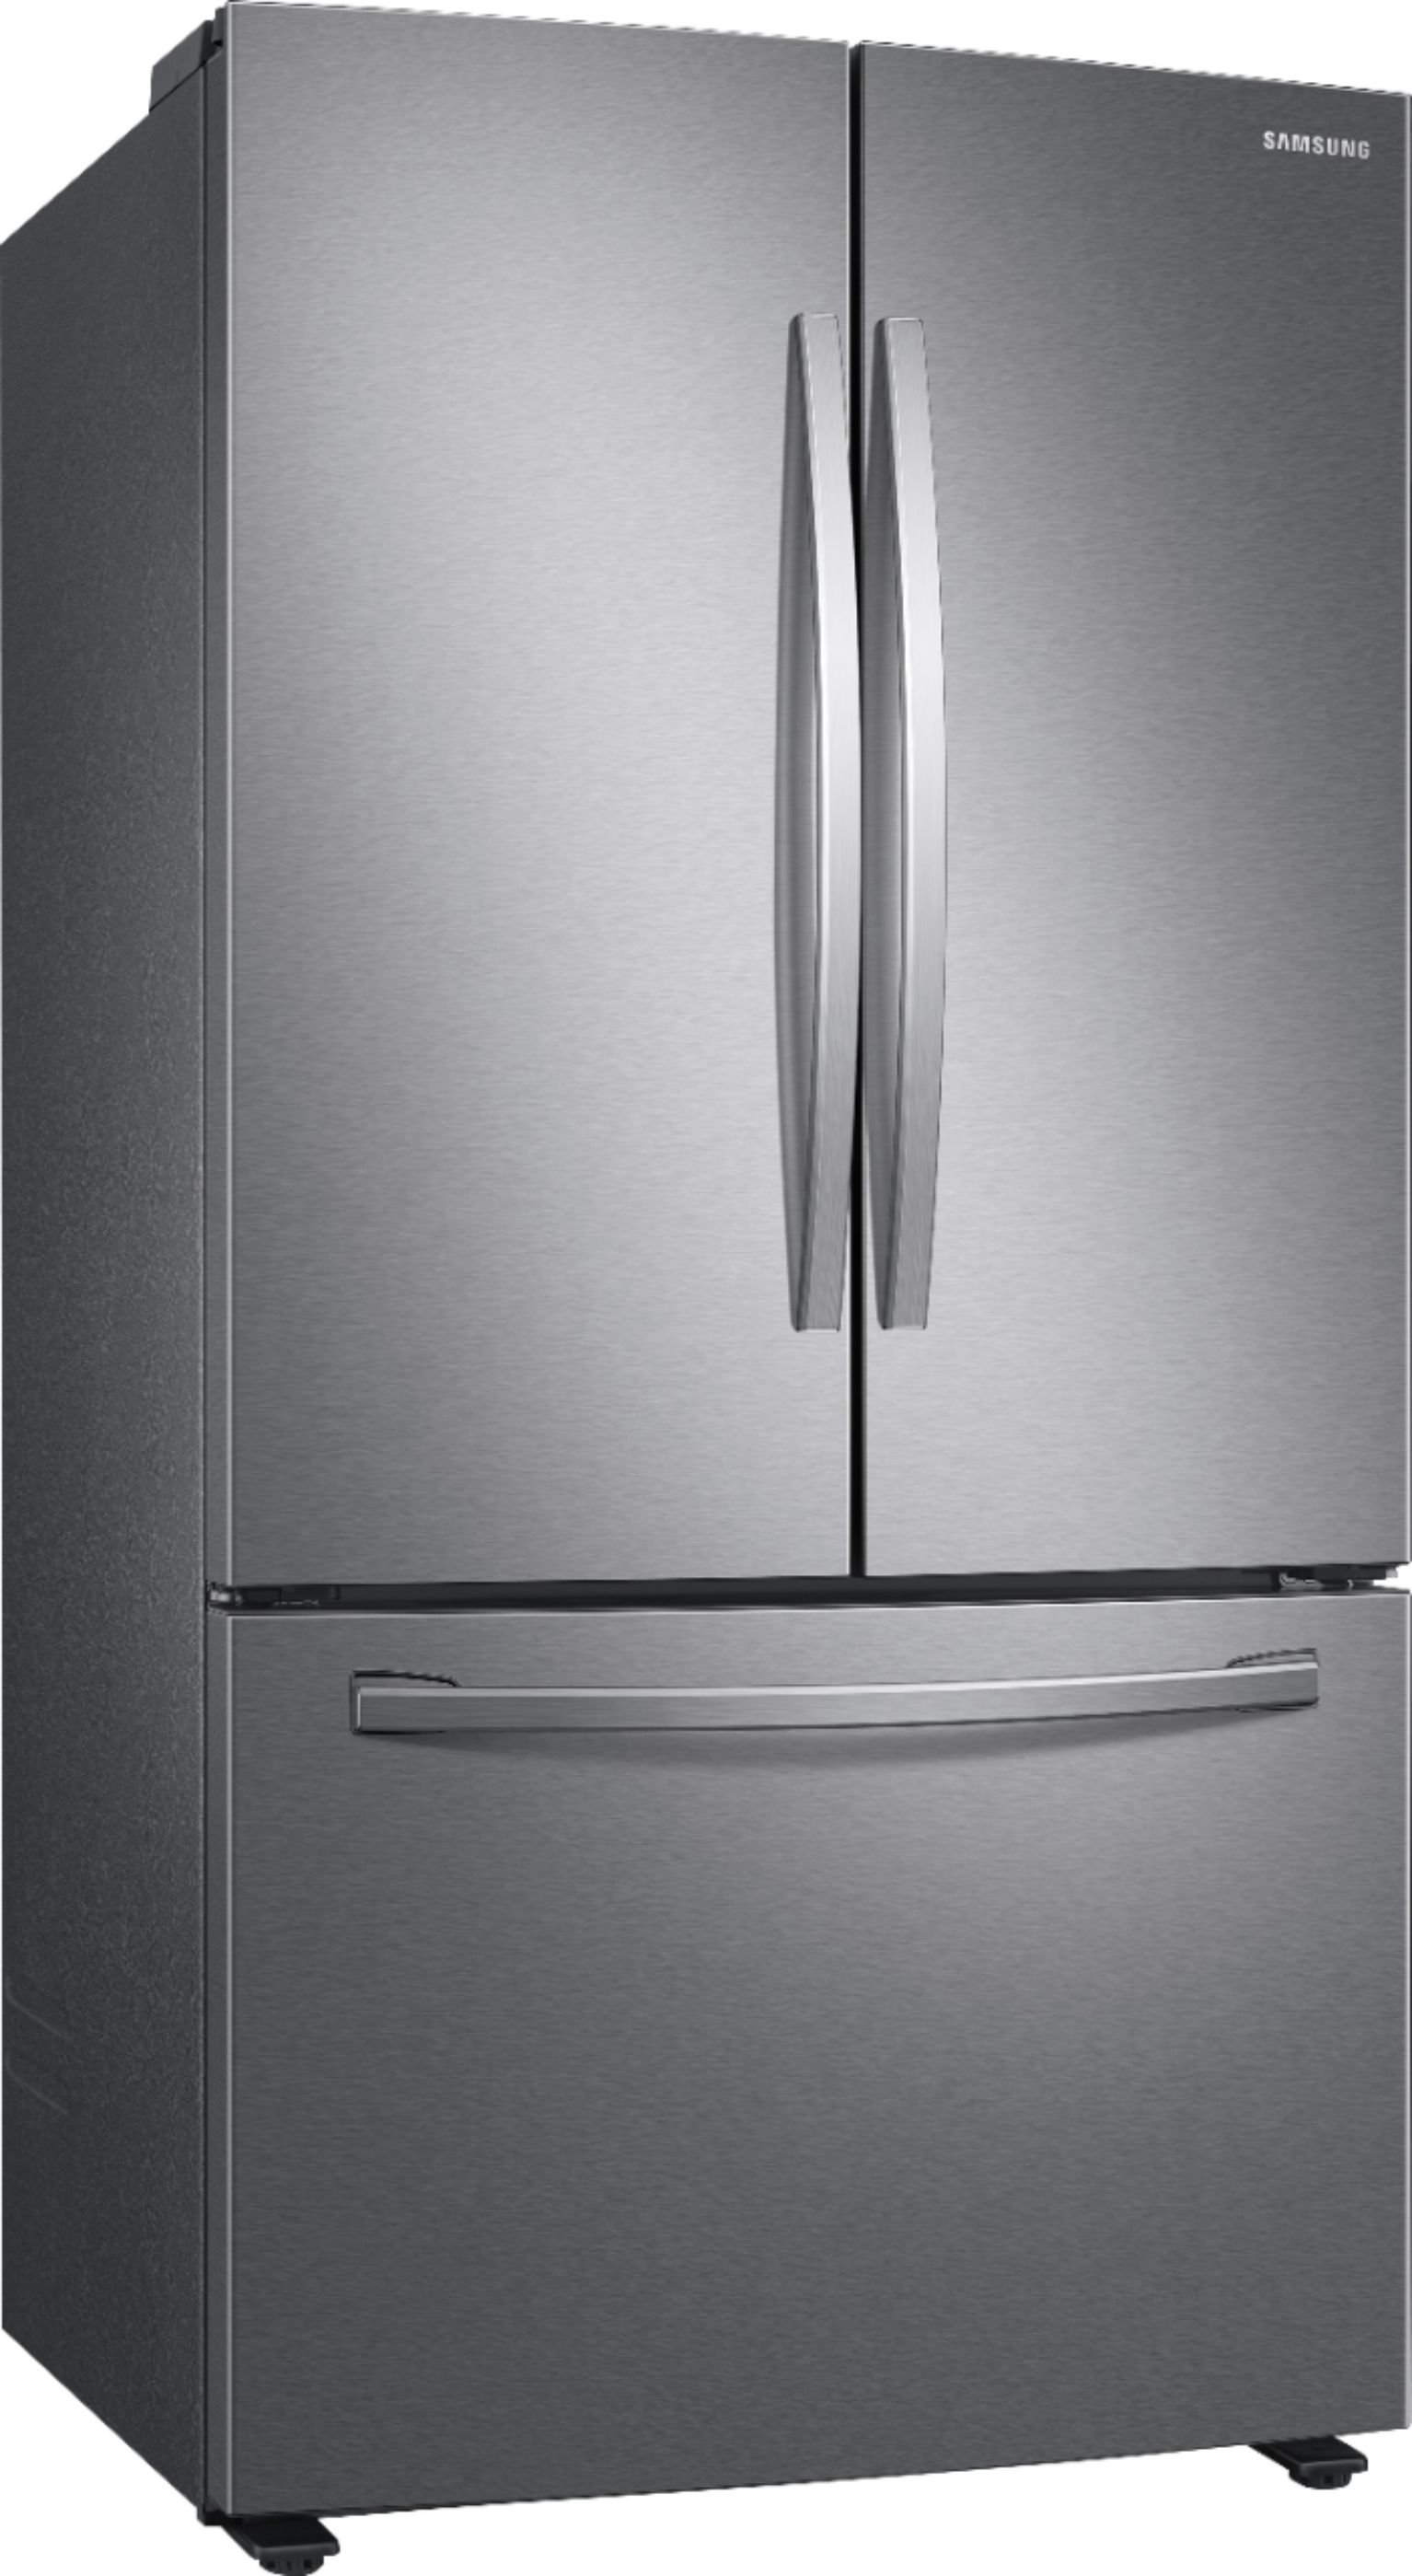 Angle View: Samsung - 28 cu. ft. 3-Door French Door Refrigerator with Large Capacity - Stainless Steel